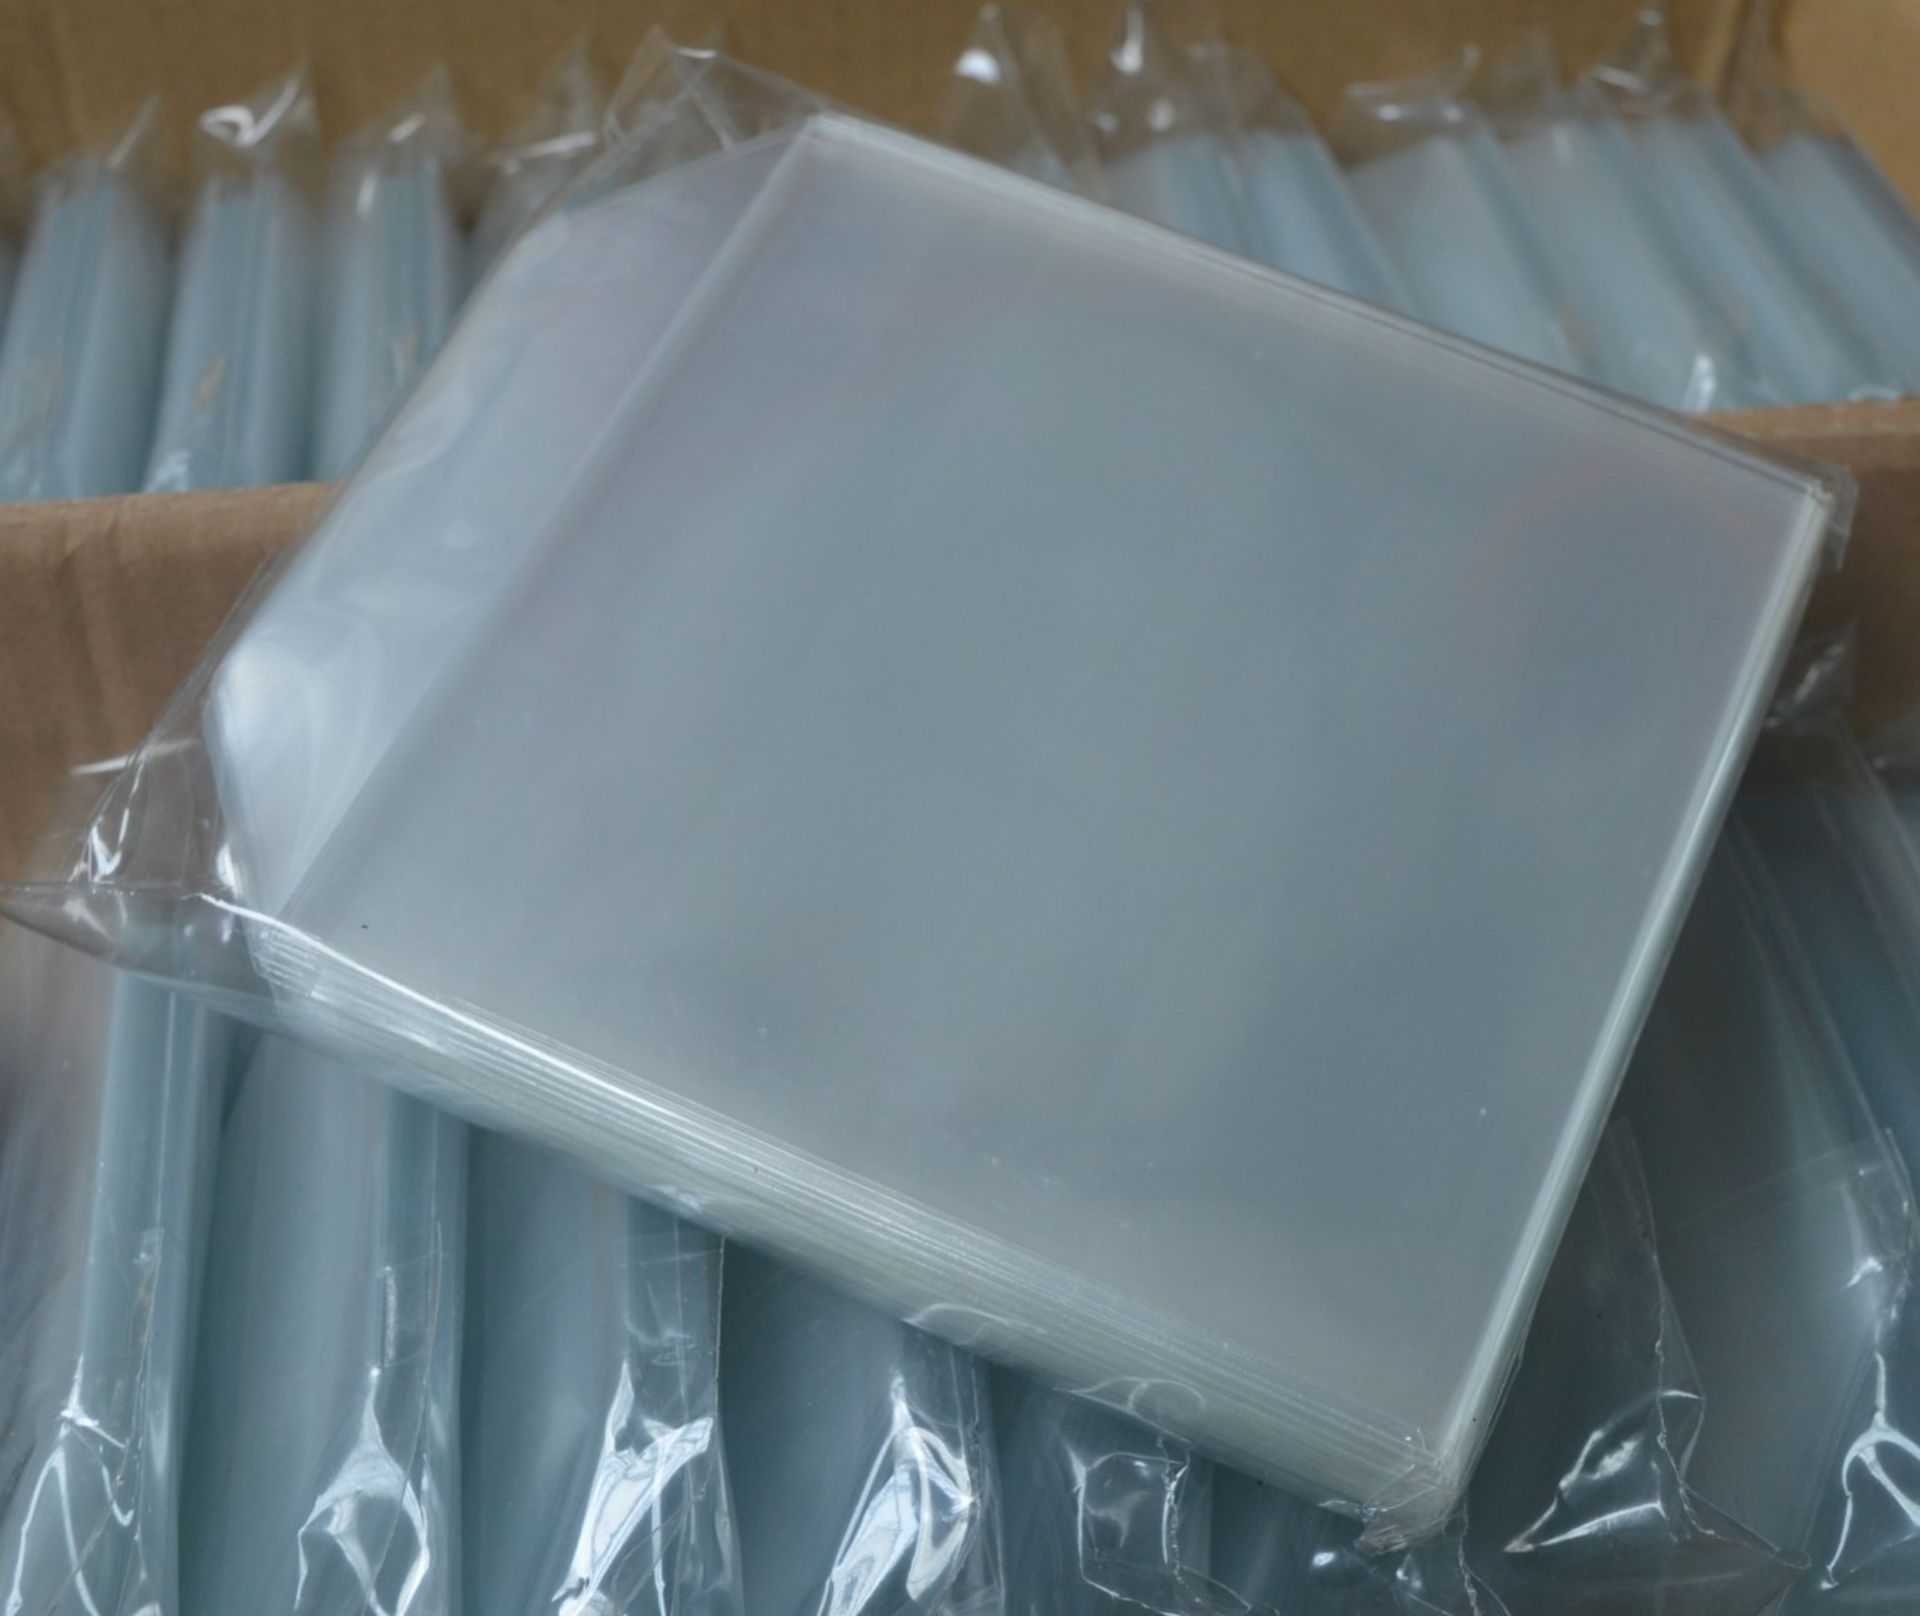 800 x Clear Plastic CD or DVD Sleeves With Flaps - Includes 8 x Packs of 100 Sleeves - Brand New Sto